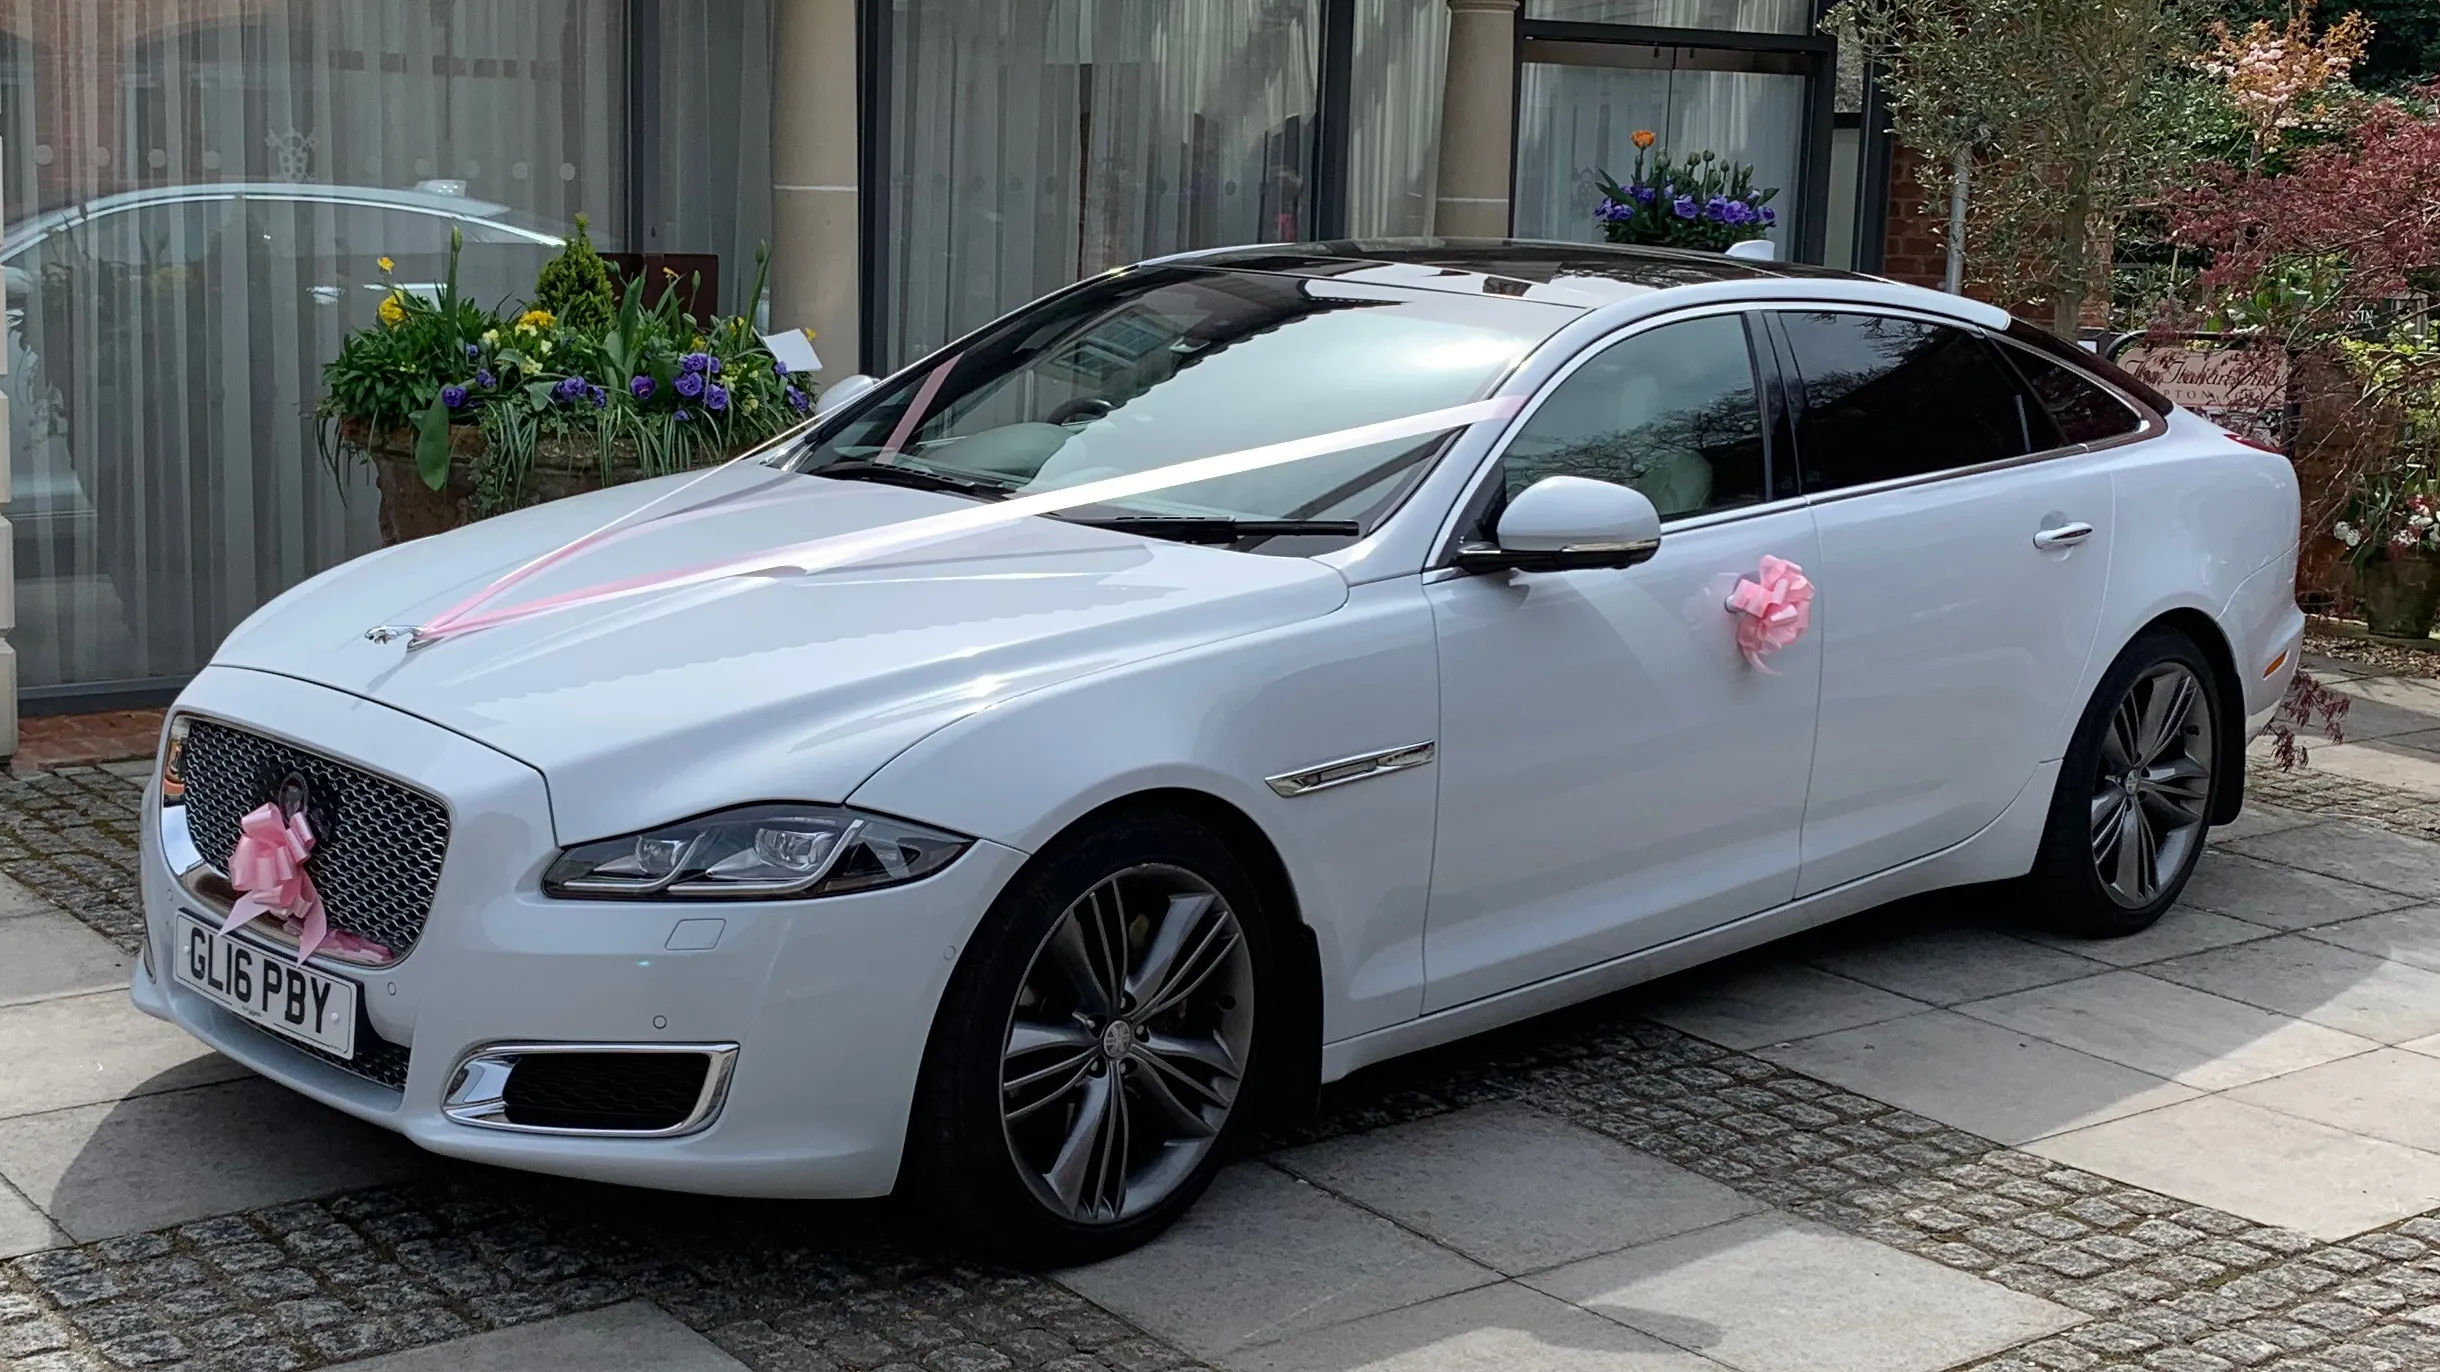 Side view of a White Jaguar XJ decorated with ribbons in front of wedding venue